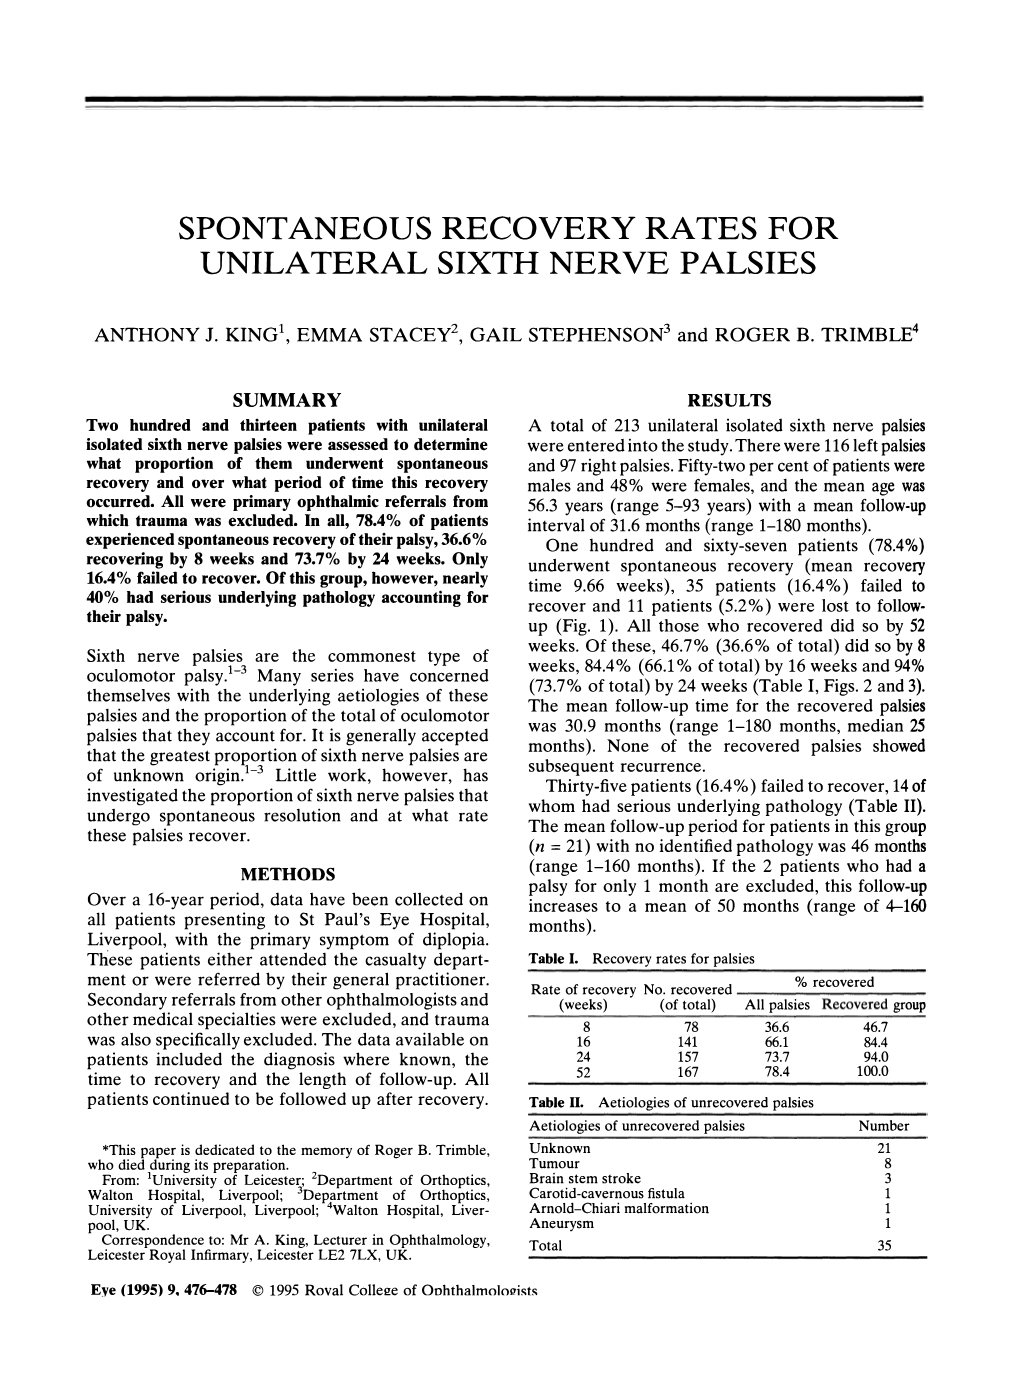 Spontaneous Recovery Rates for Unilateral Sixth Nerve Palsies